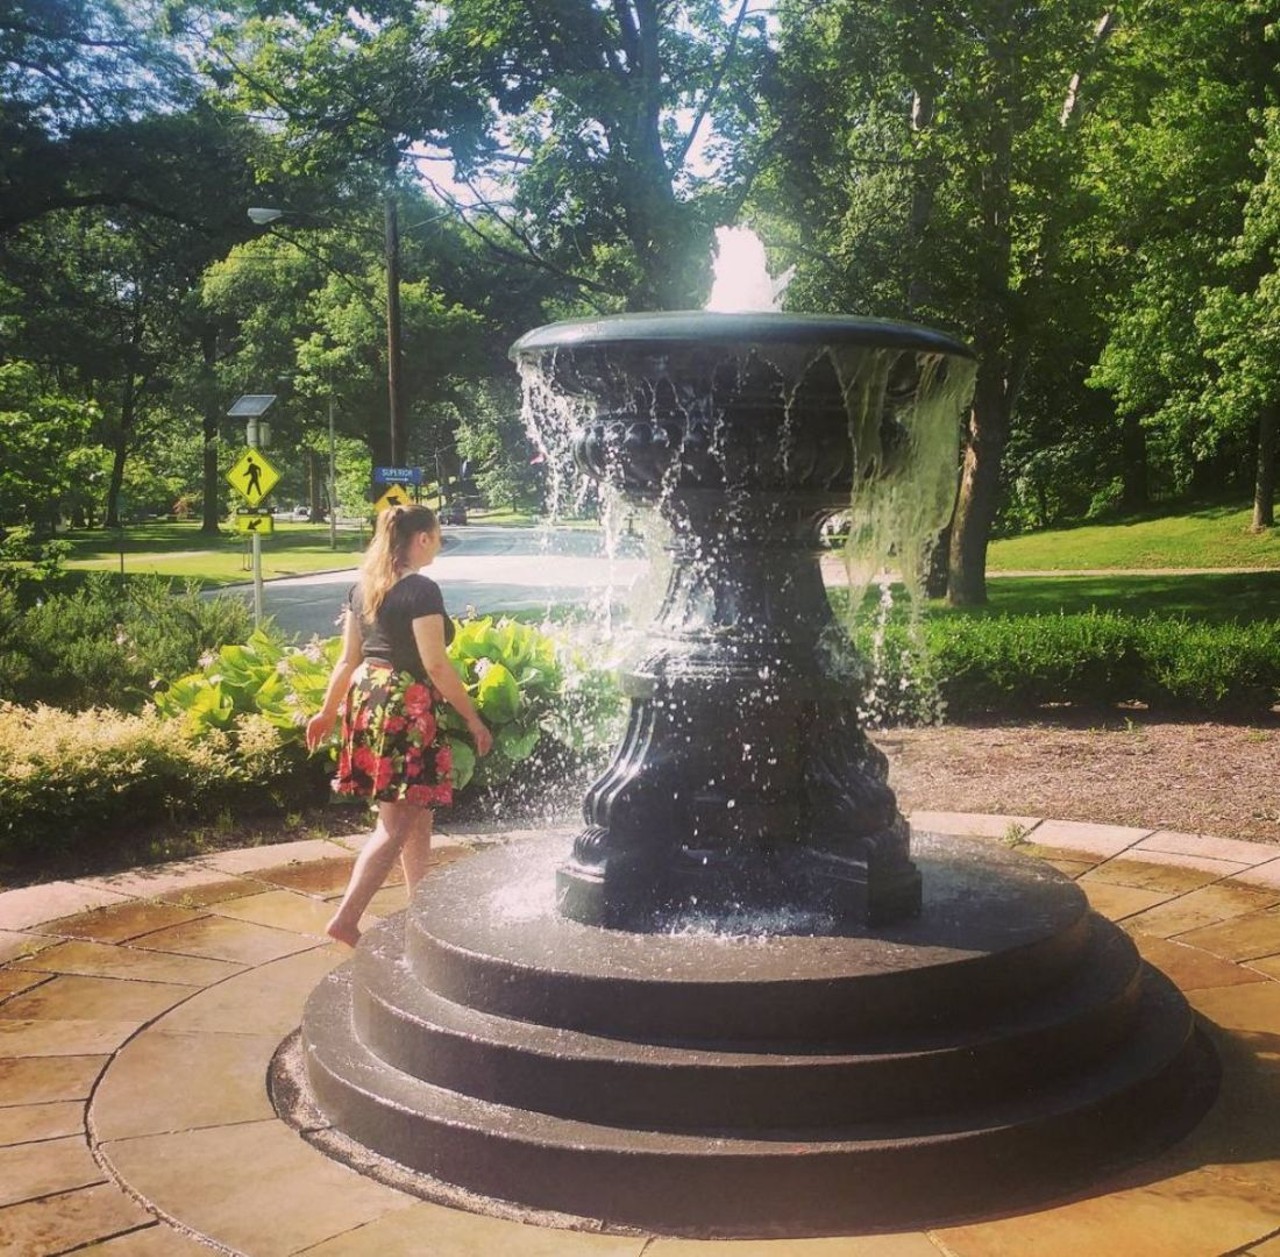 Rockefeller Park
750 E. 88 St., 216-664-2512
This University Circle park is home of Cleveland Cultural Gardens, making it an ideal spot for a picnic. Find a quiet area to set up your meal and take some time afterwards to appreciate the plants. 
Photo via amymakescones/Instagram